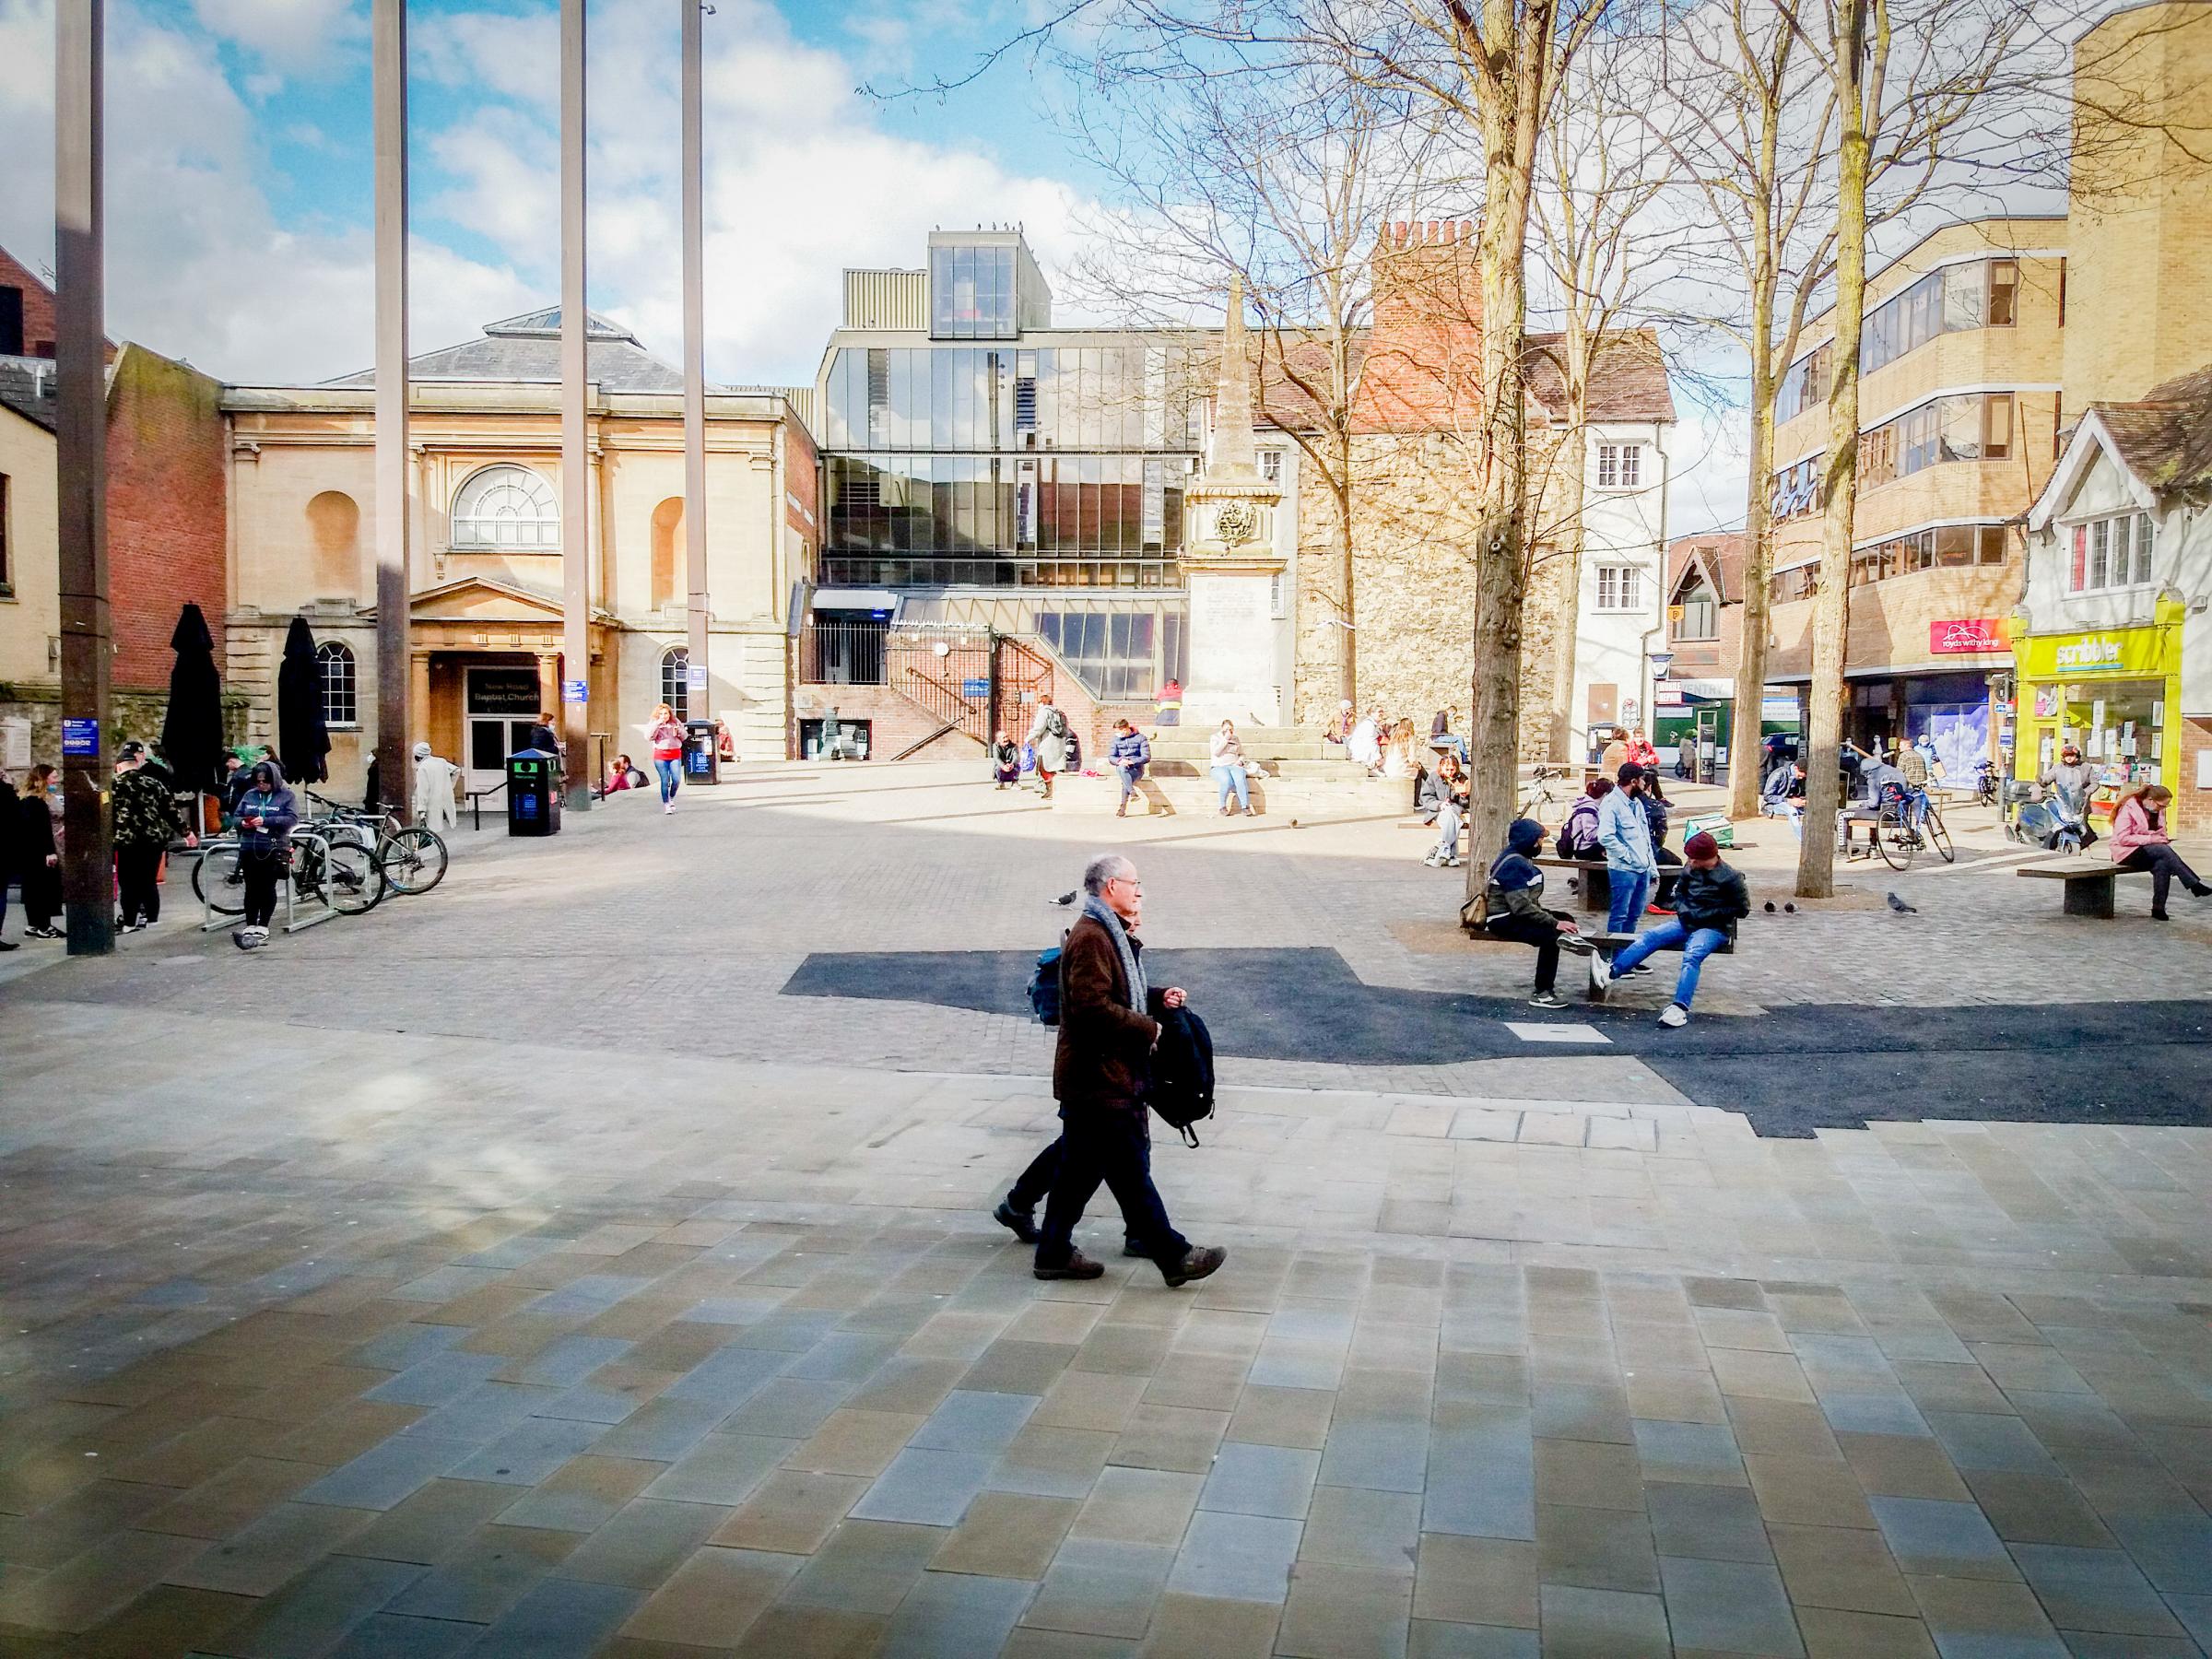 Bonn Square, Oxford, on Friday, February 26, 2021, during the third coronavirus lockdown. Picture: Pete Hughes